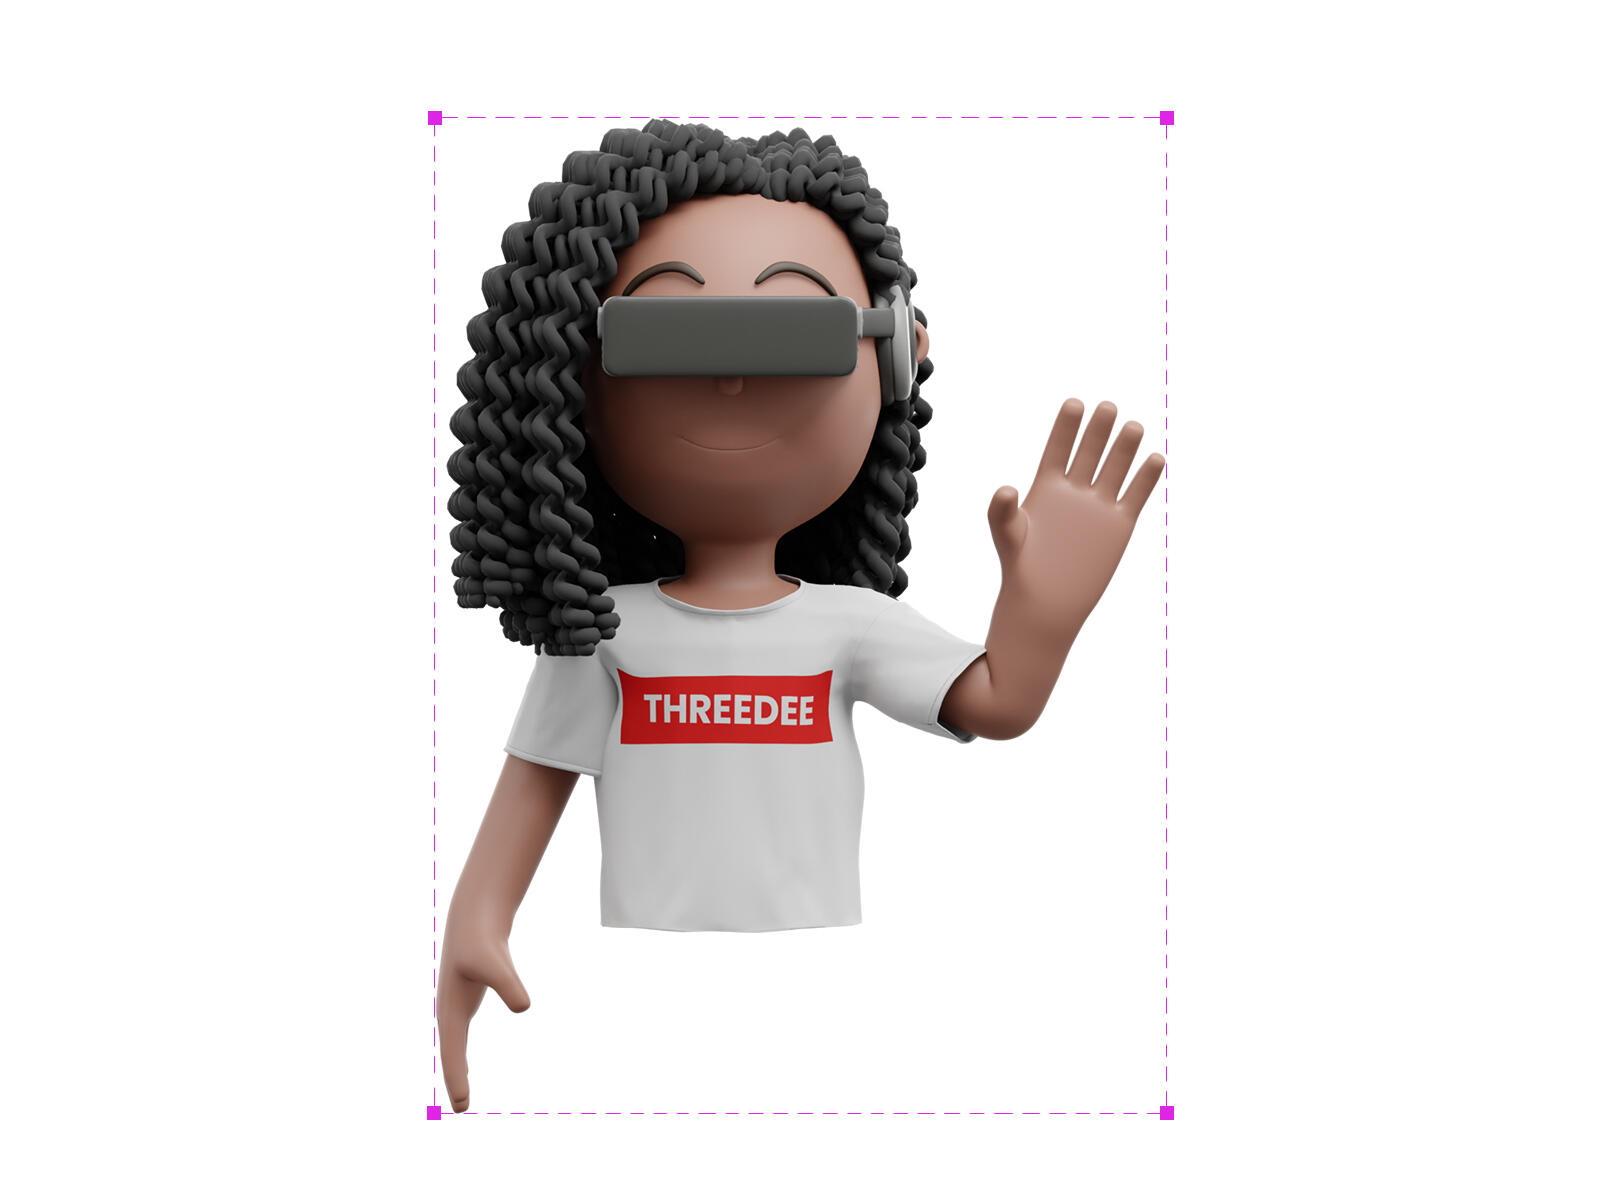 High quality renders of 3D avatars from AVATARZ 3D pack